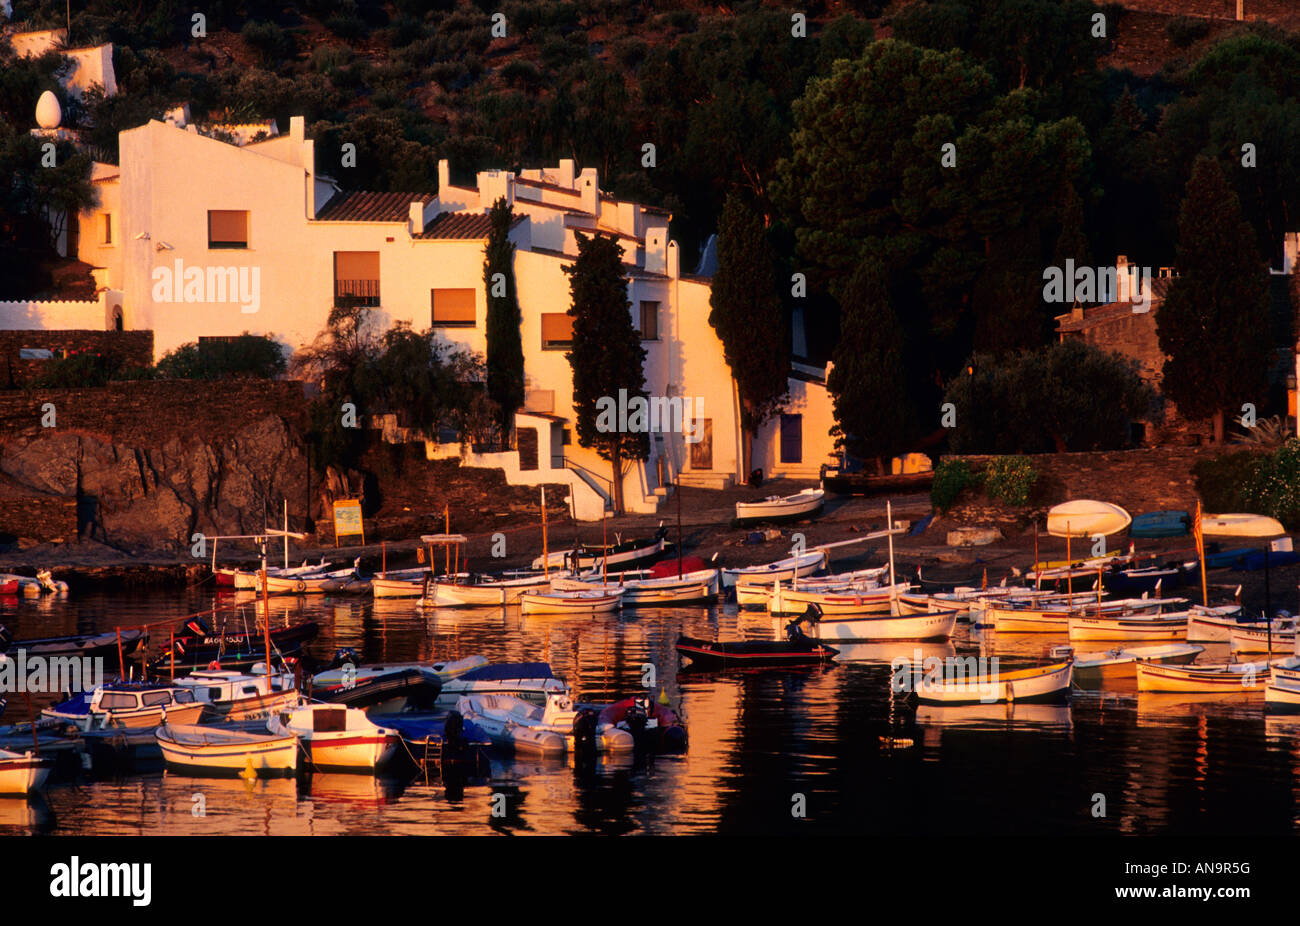 Salvador Dalí´s house and museum. Portlligat. Girona province. Spain Stock Photo